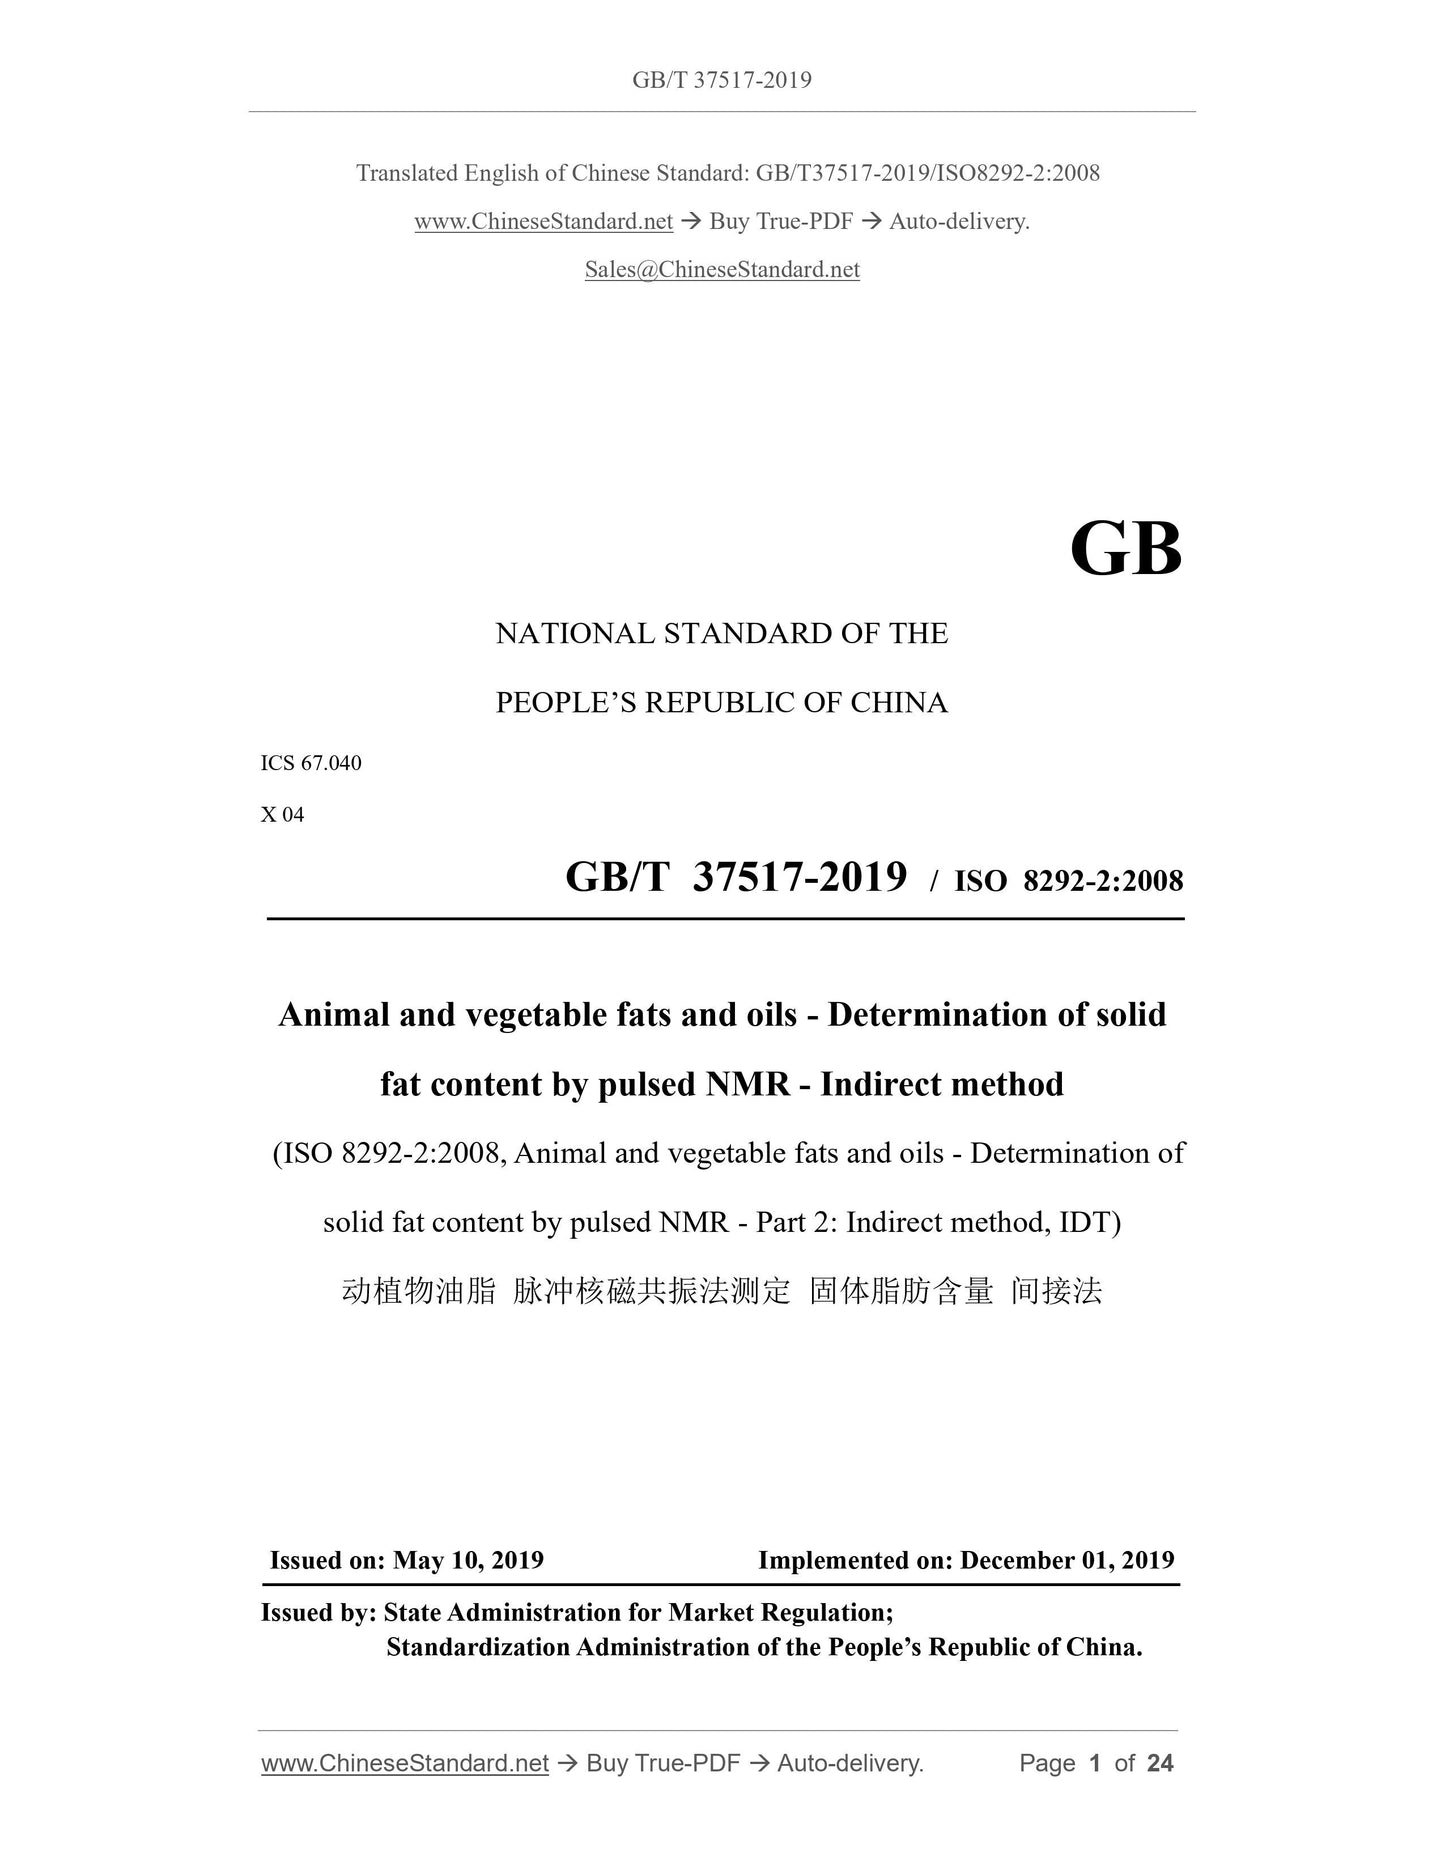 GB/T 37517-2019 Page 1